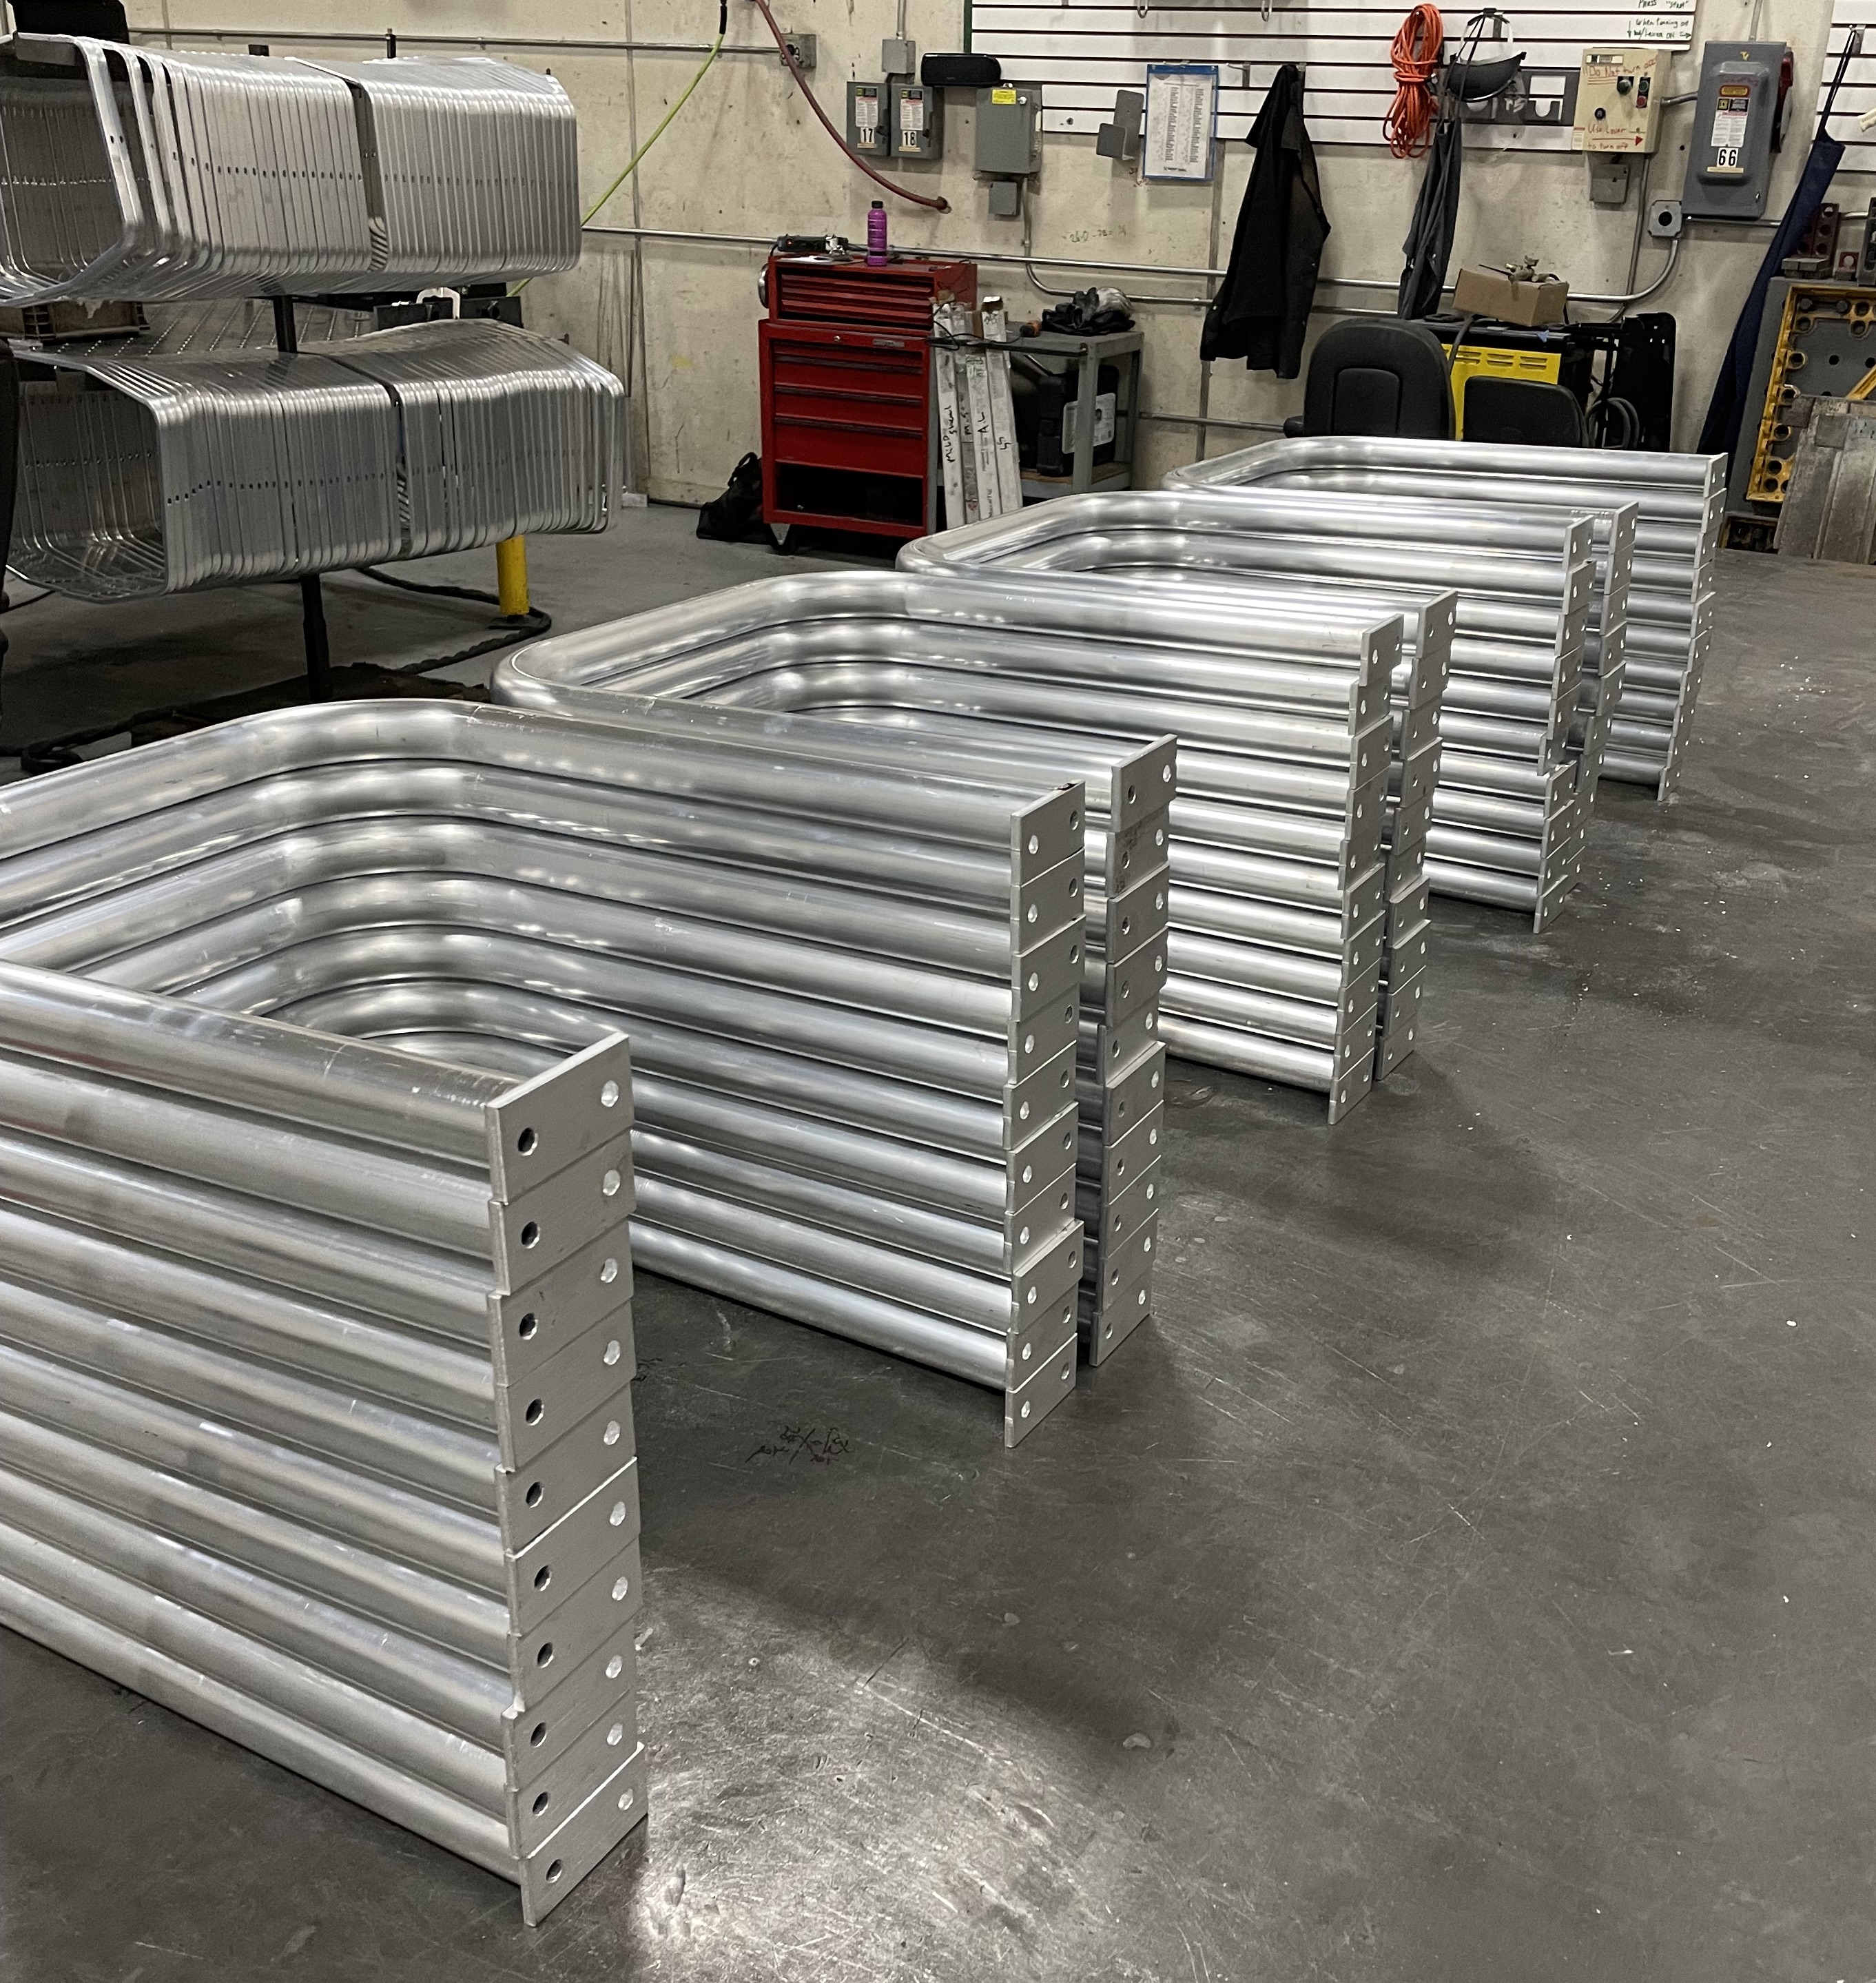 Aluminum tube formed and tabs welded on for handrails.